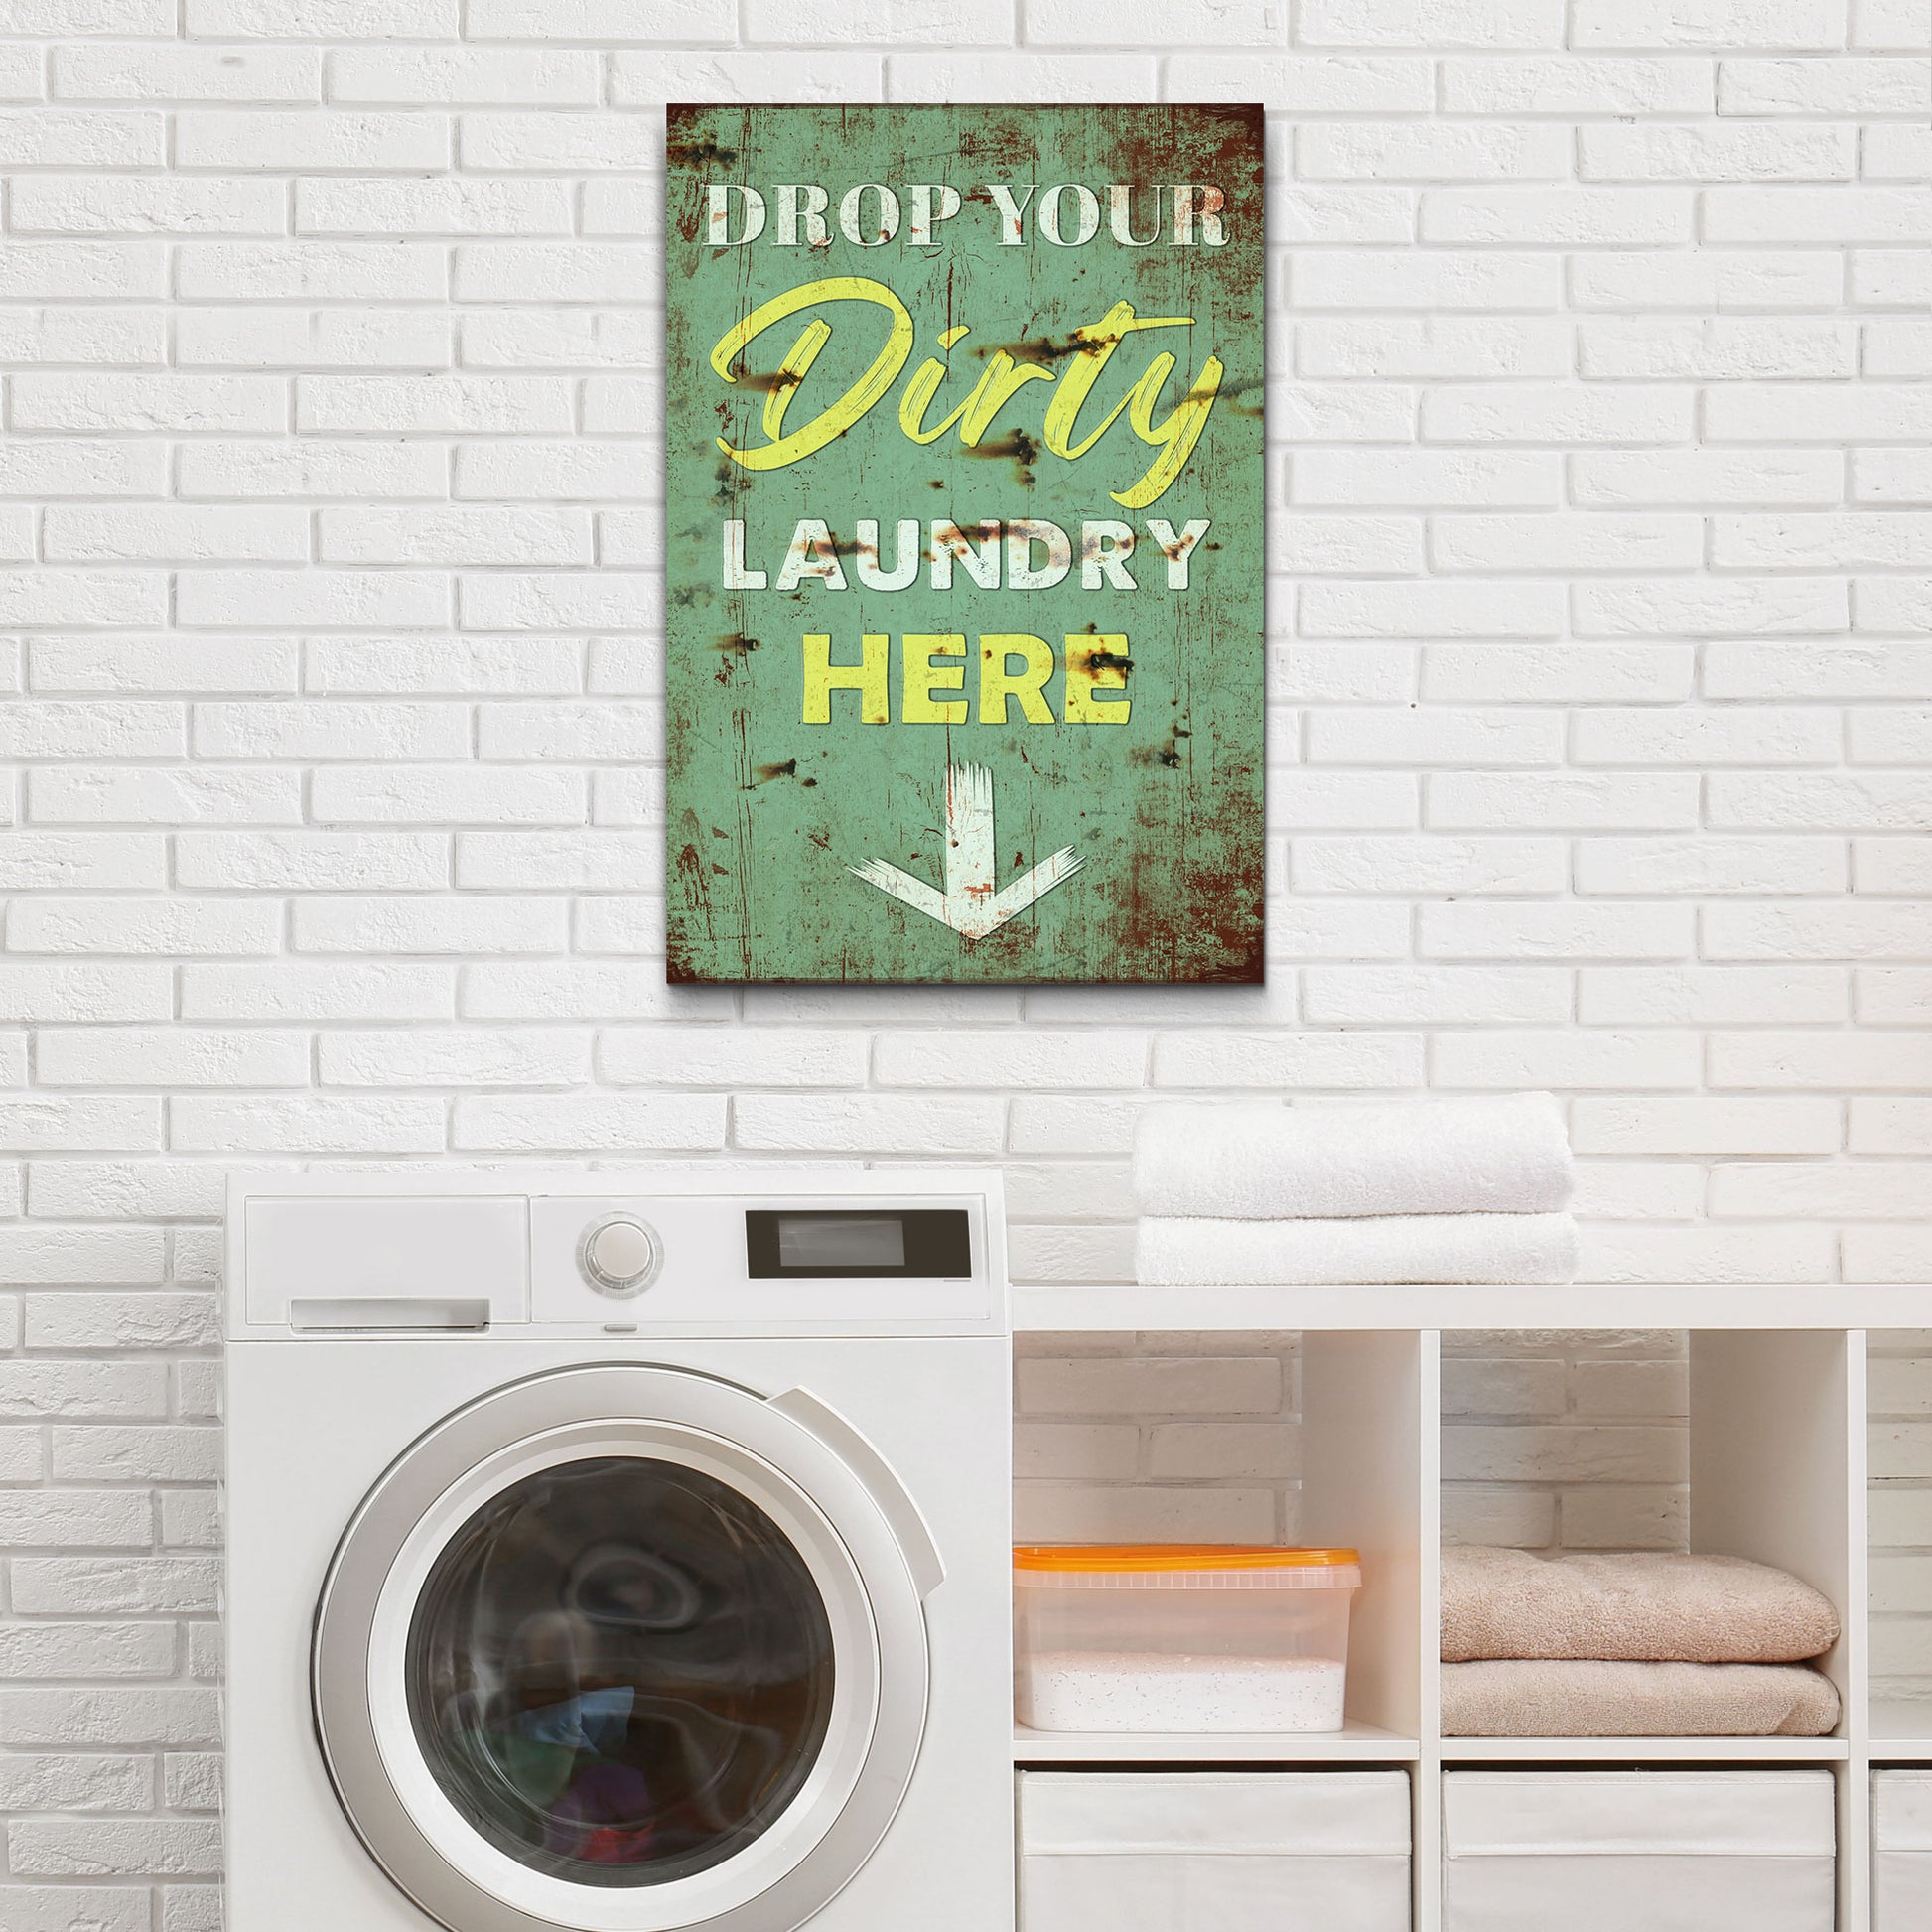 Drop Your Dirty Laundry Here Sign - Image by Tailored Canvases